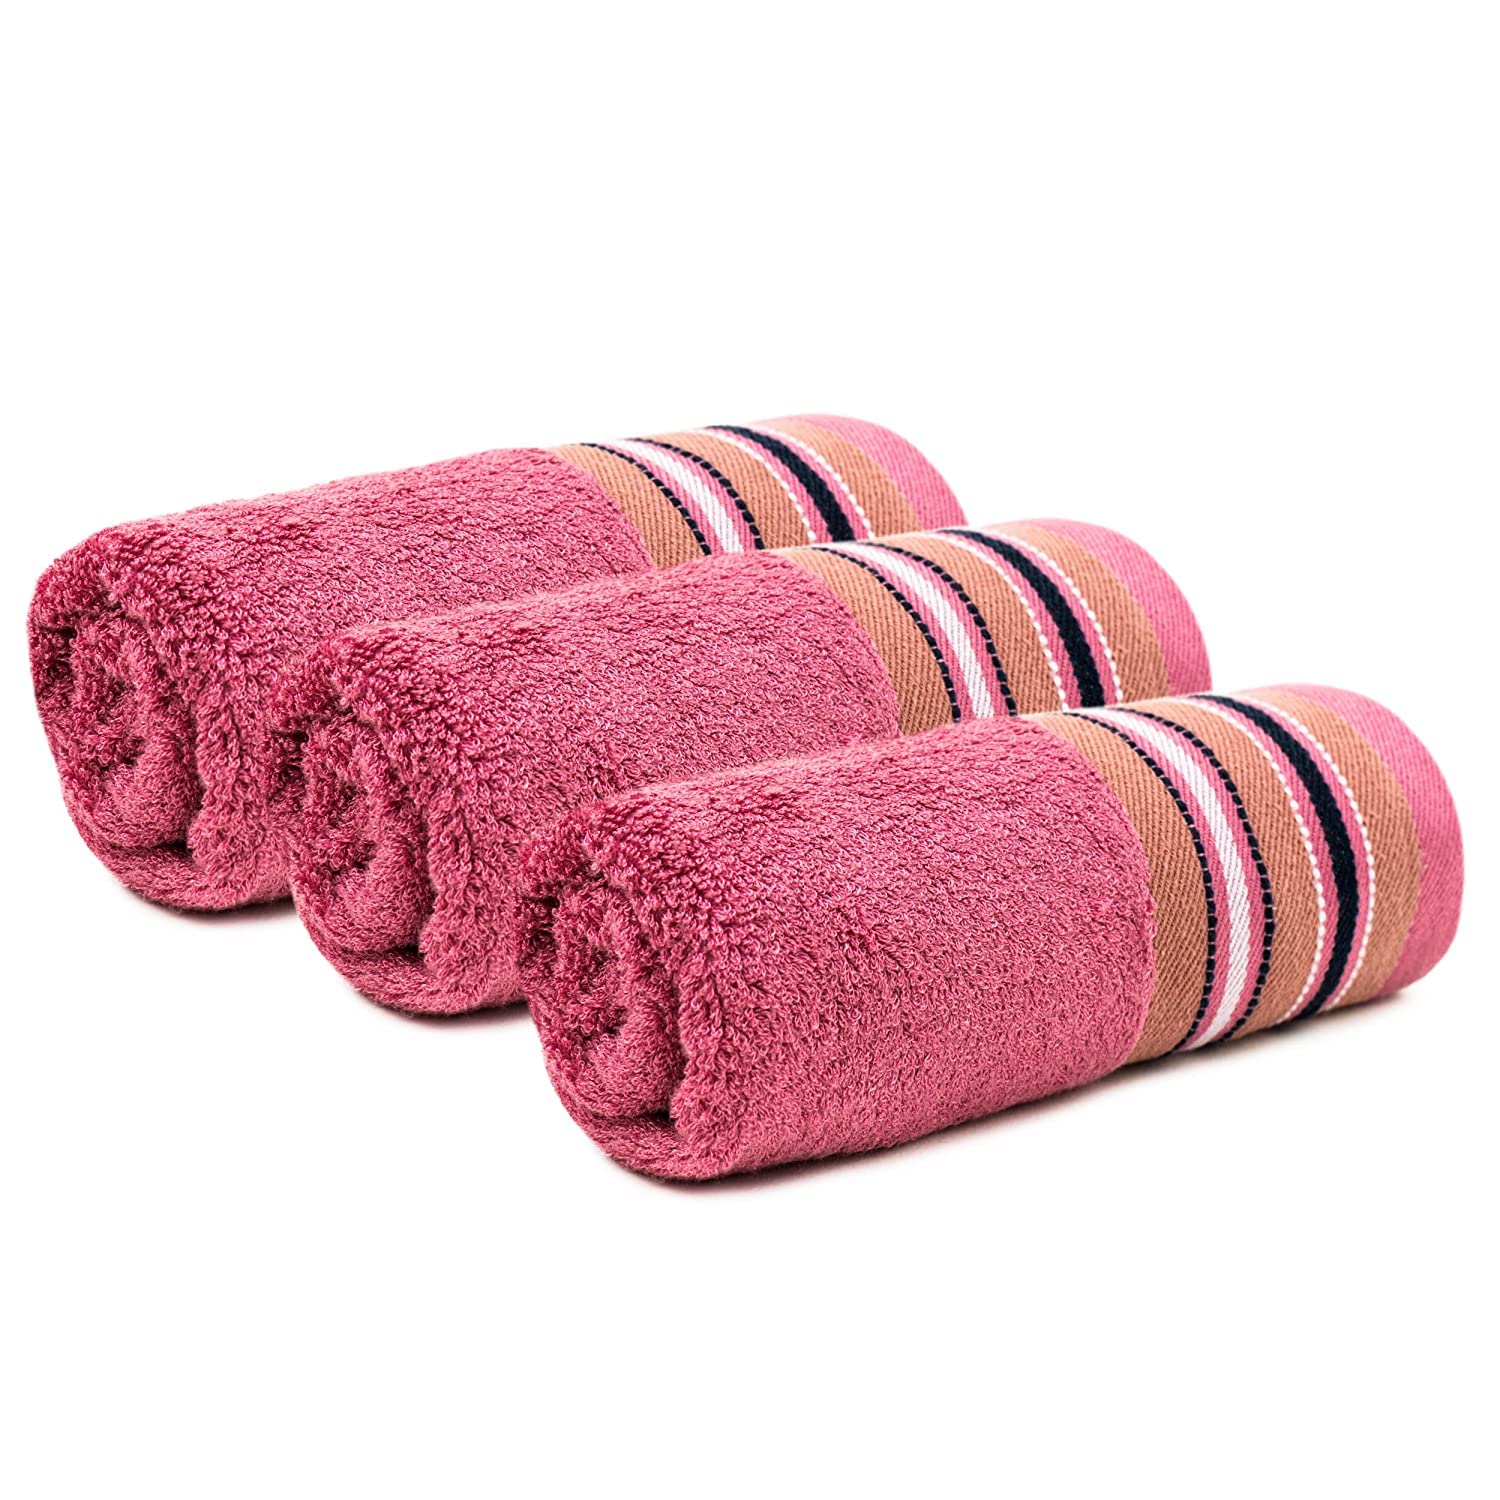 Mush Designer Bamboo Face Towel |Ultra Soft, Absorbent & Quick Dry Towel for Bath, Beach, Pool, Travel, Spa and Yoga (Ruby Red, Face Towel, Set of 3)